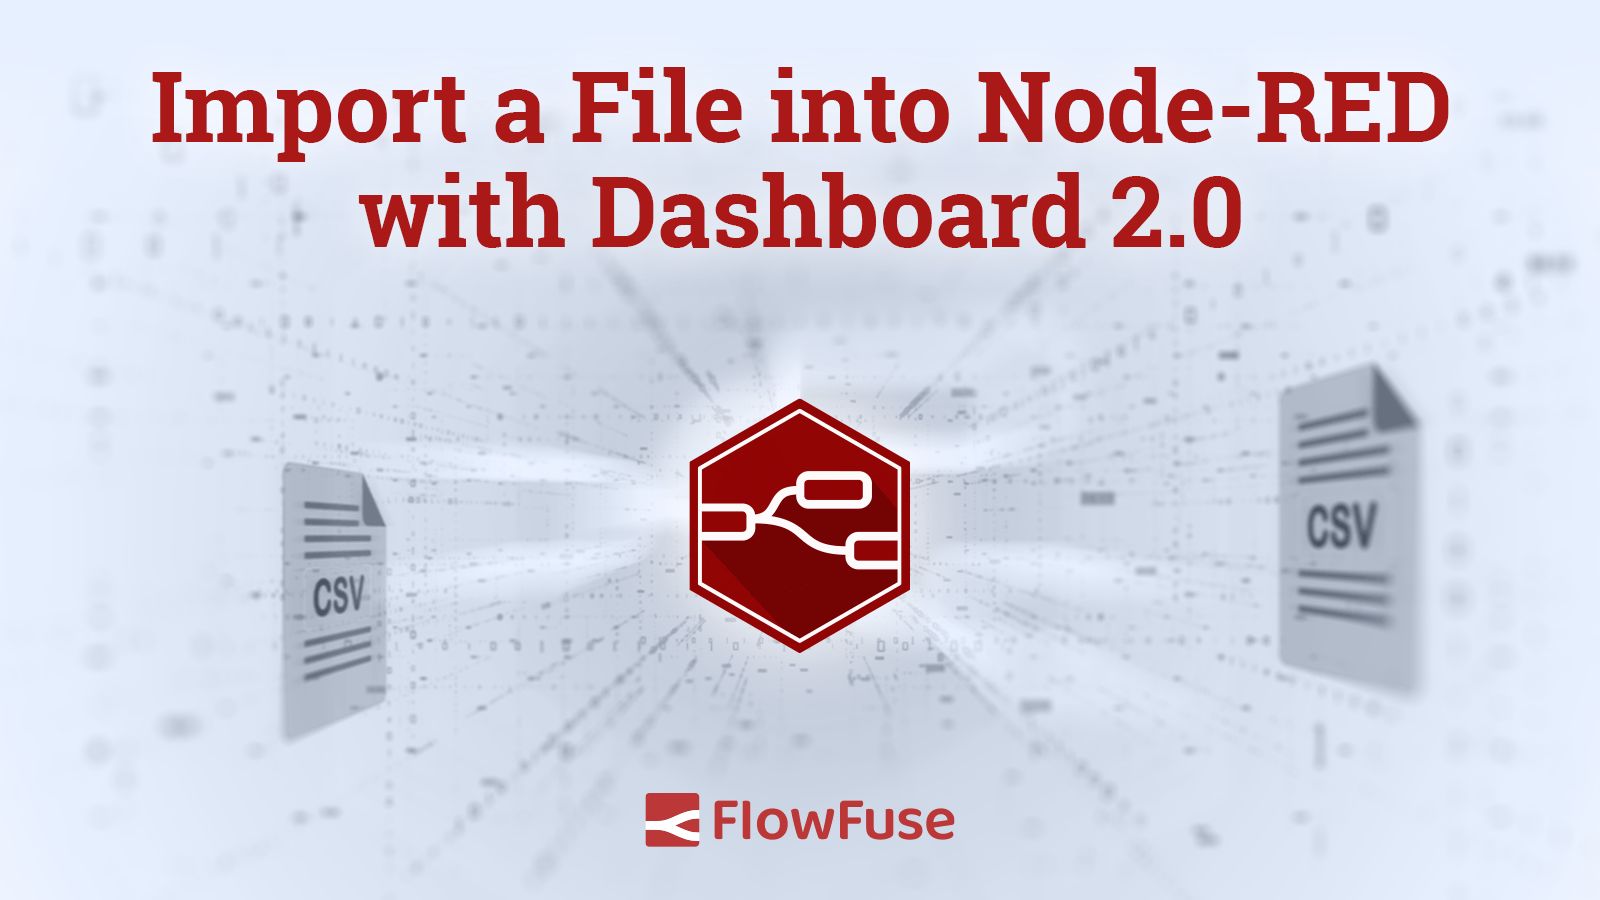 Image representing Import a File into Node-RED with Dashboard 2.0